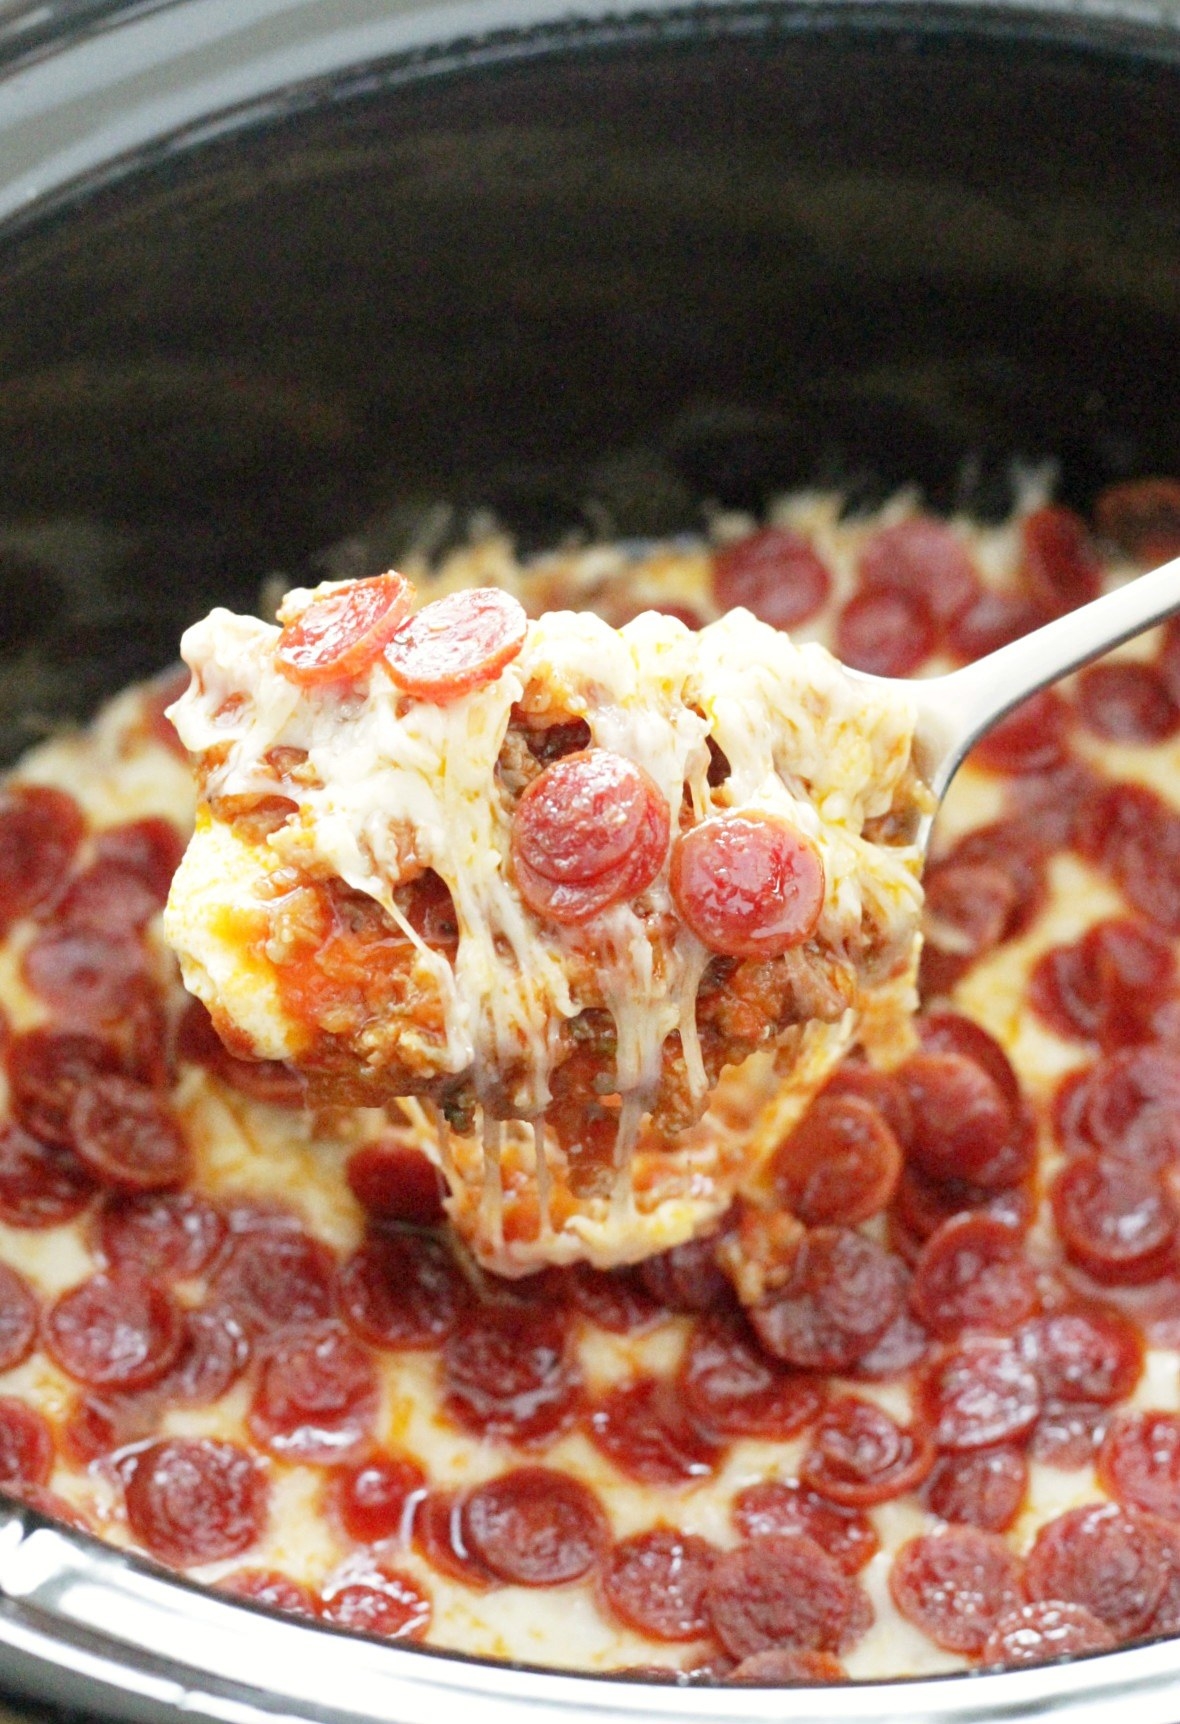 17 Super Bowl Recipes Can Make In The Slow Cooker